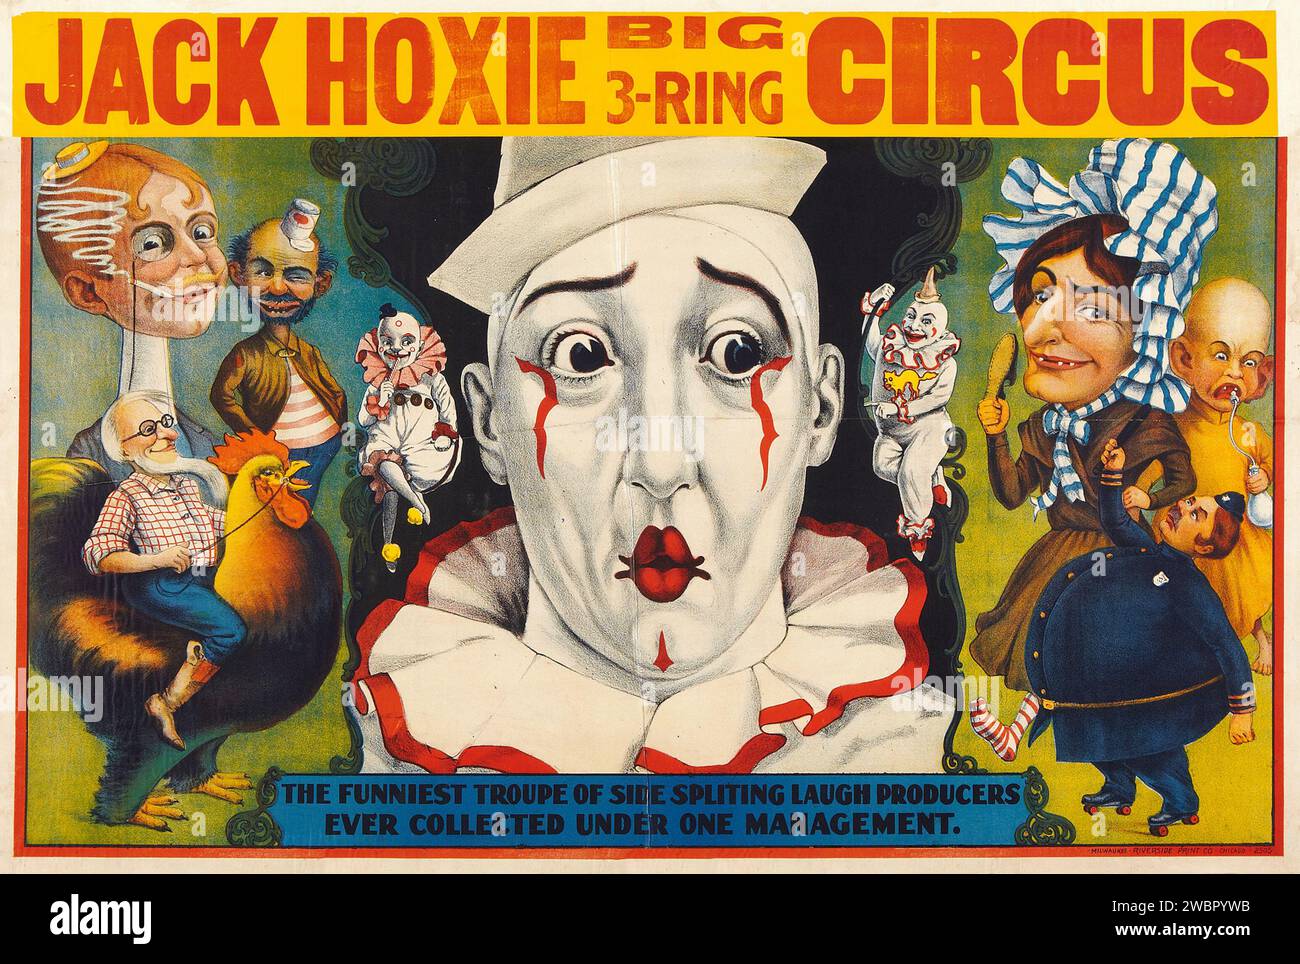 Jack Hoxie Big 3 Ring Circus affiche (Riverside Print Co, 1937) Banque D'Images